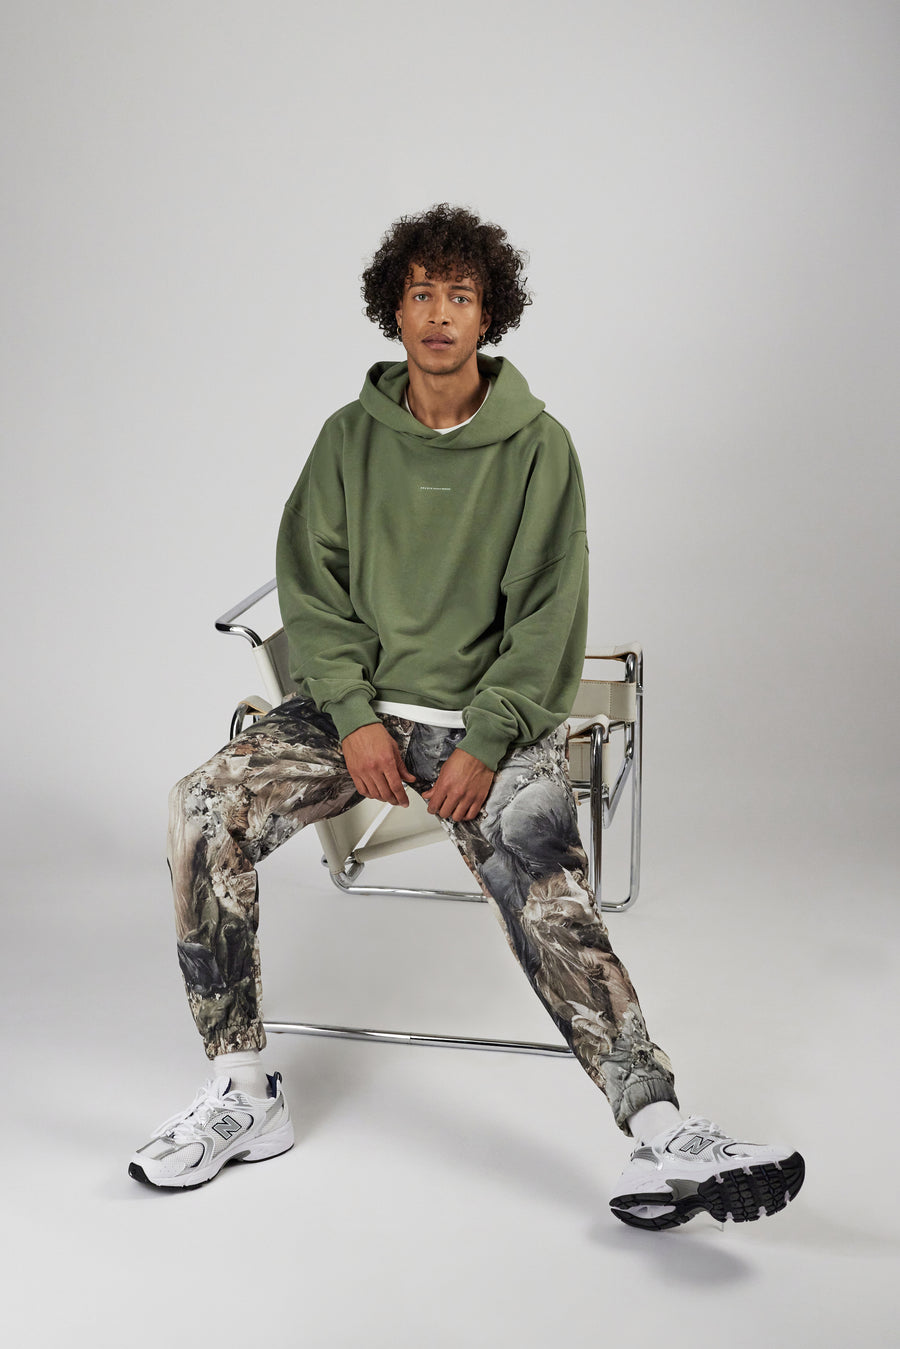 Man sitting on a chair wearing allover printed sweatpants and hoddie in color sage green